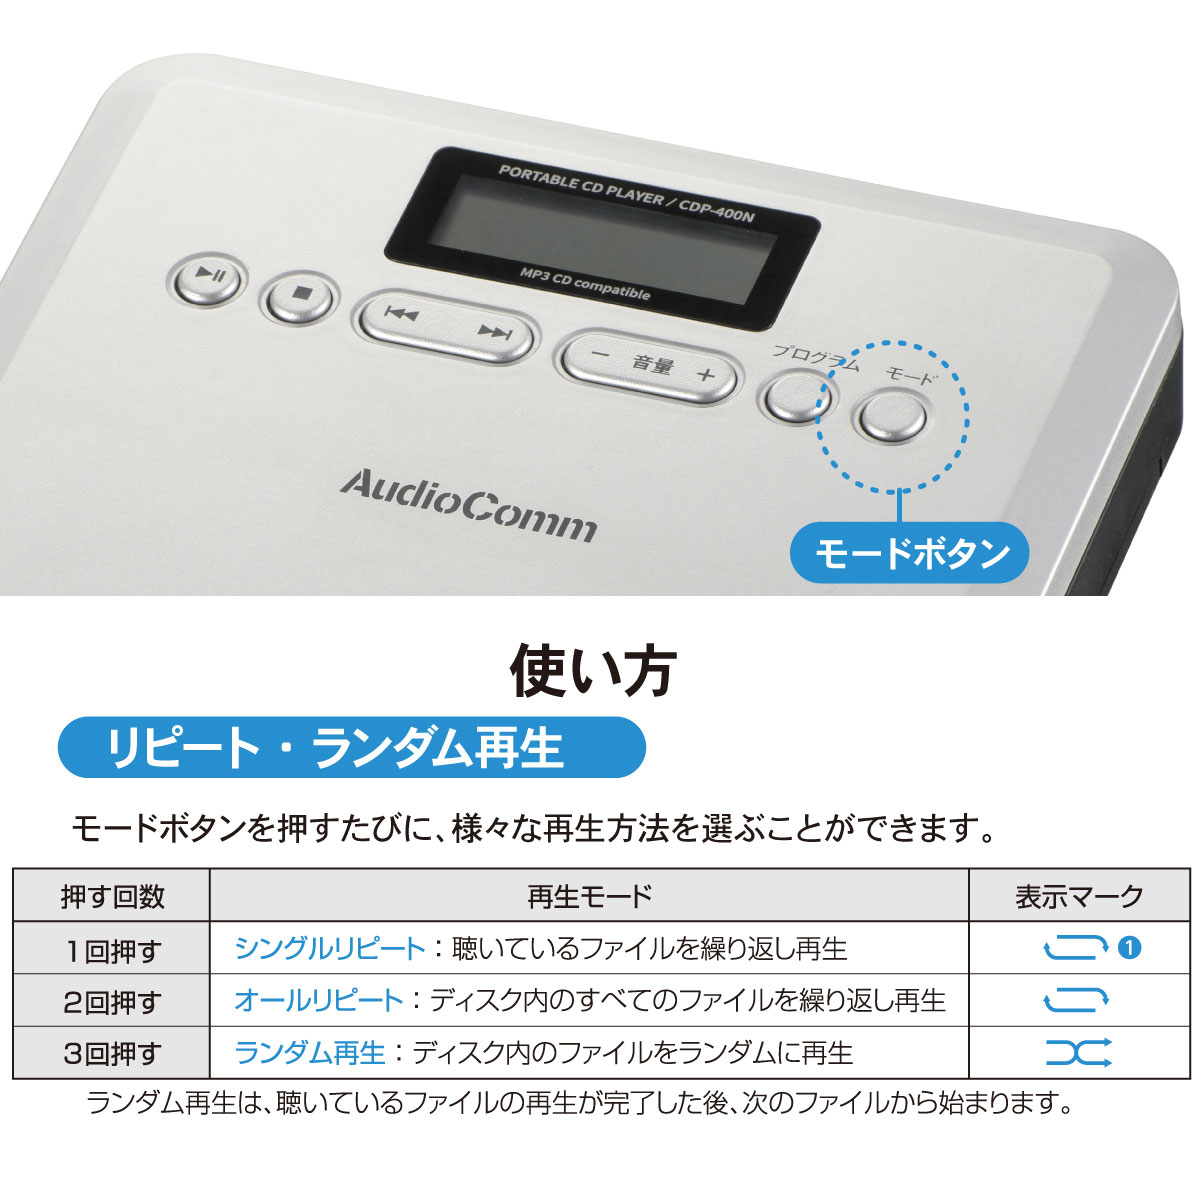 CD player AudioComm portable CD player MP3 correspondence lCDP-400N 03-7240 ohm electro- machine 